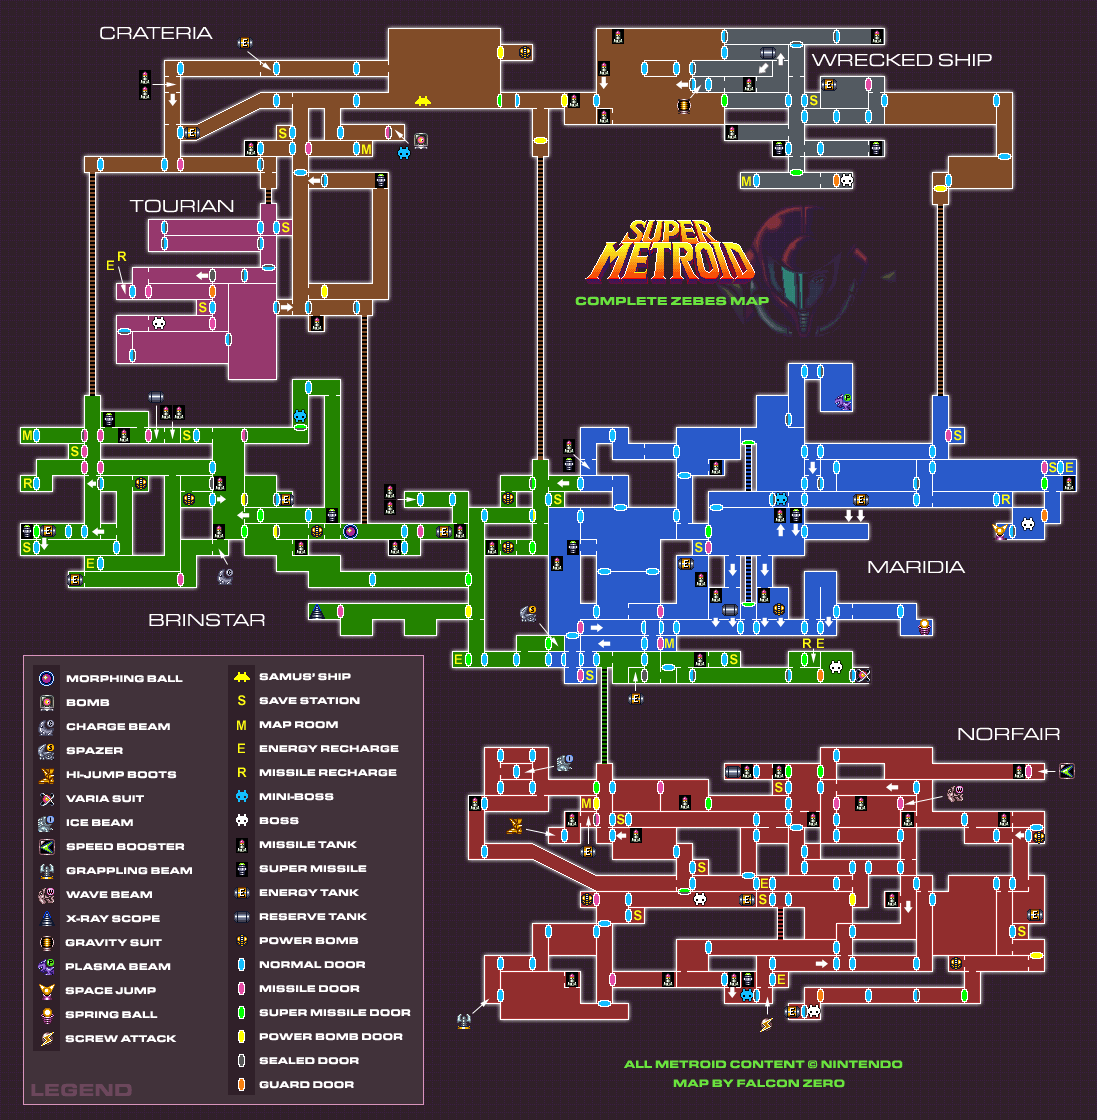 Super Metroid Complete Map.